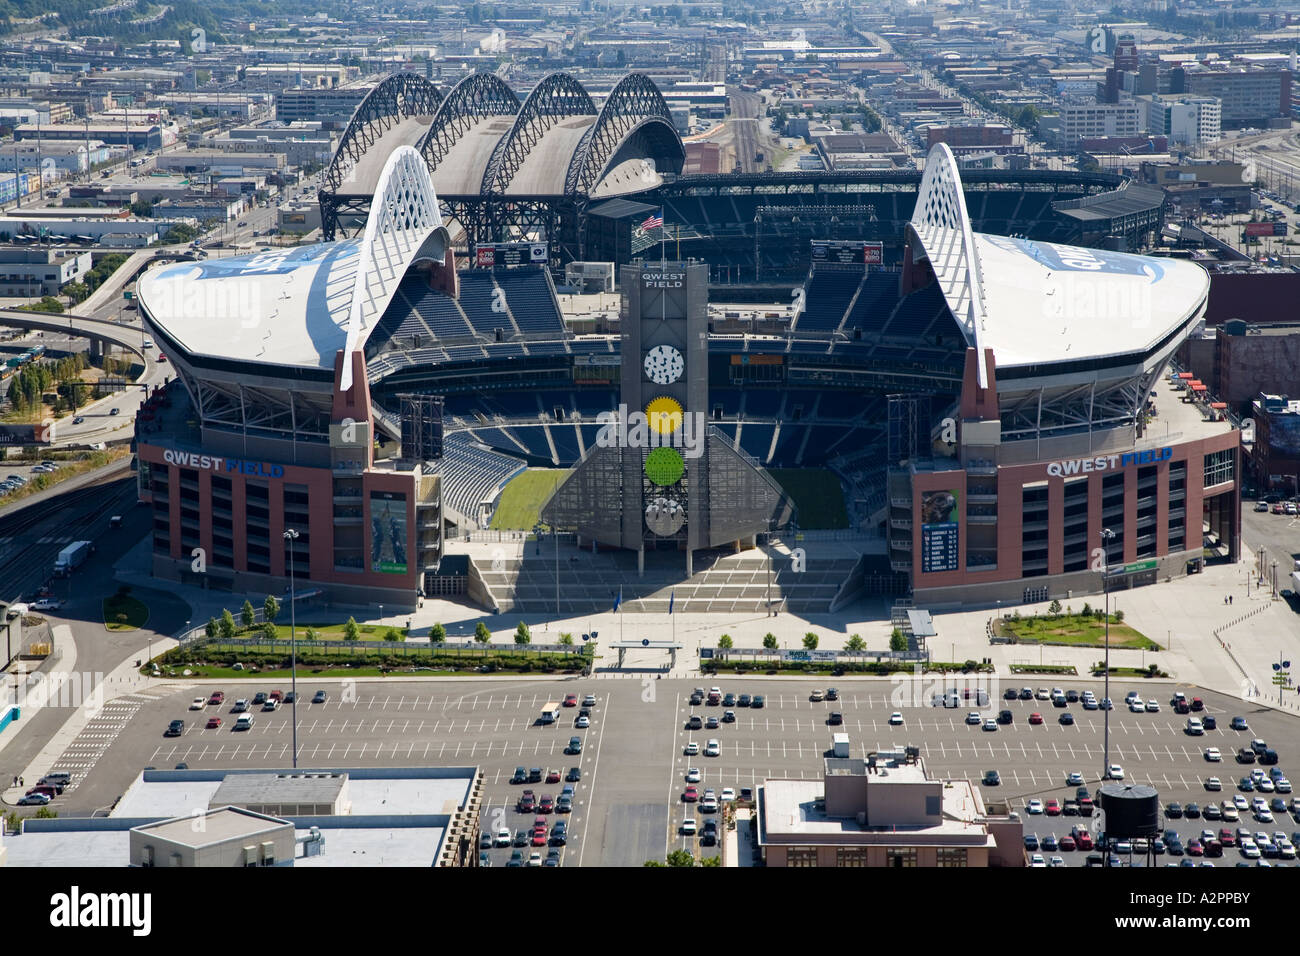 Qwest Field High Resolution Stock Photography And Images Alamy [ 956 x 1300 Pixel ]